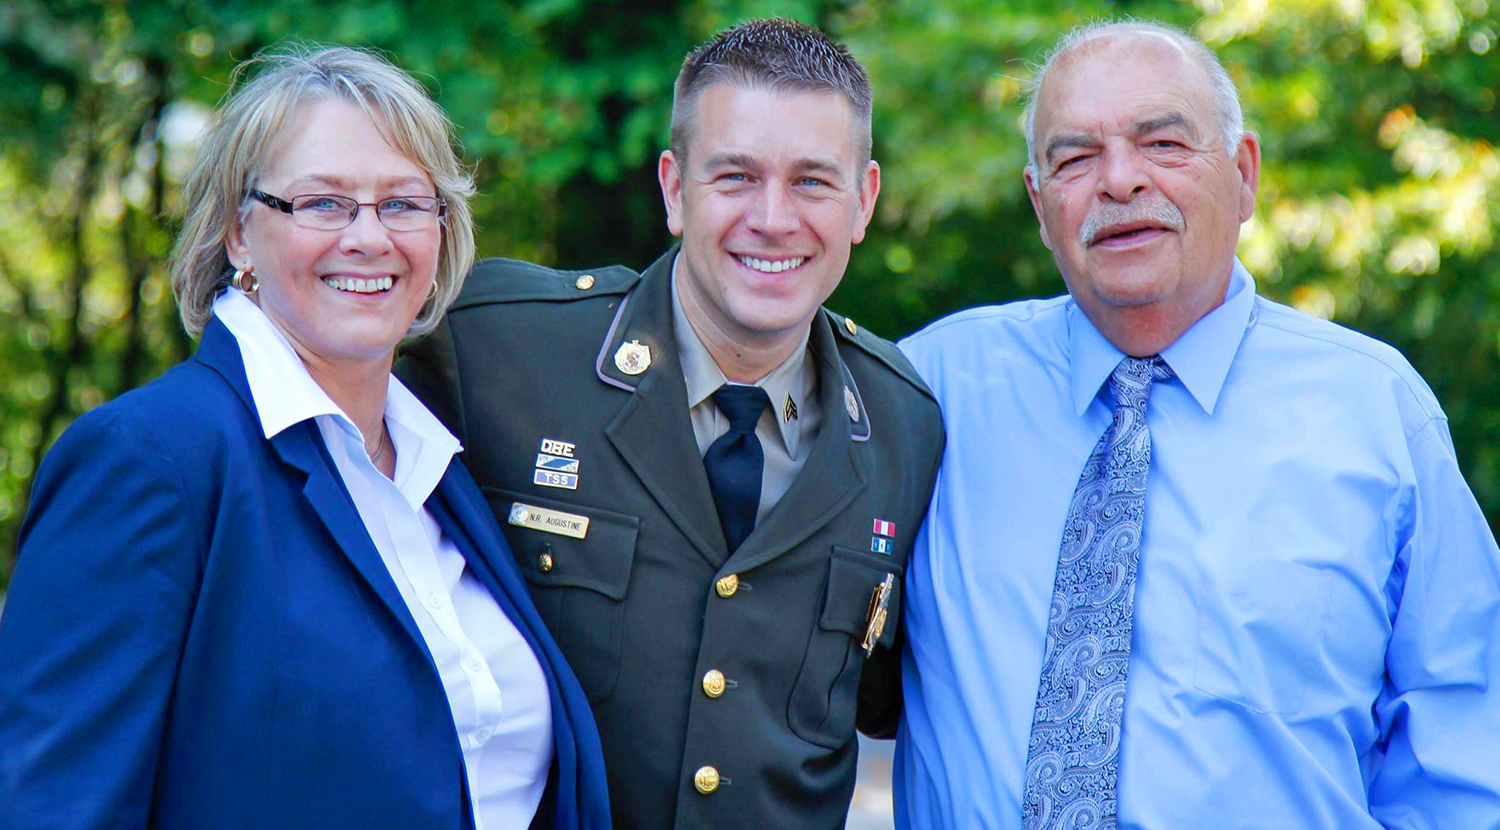 With my parents on the day of my promotion ceremony to the rank of Sergeant